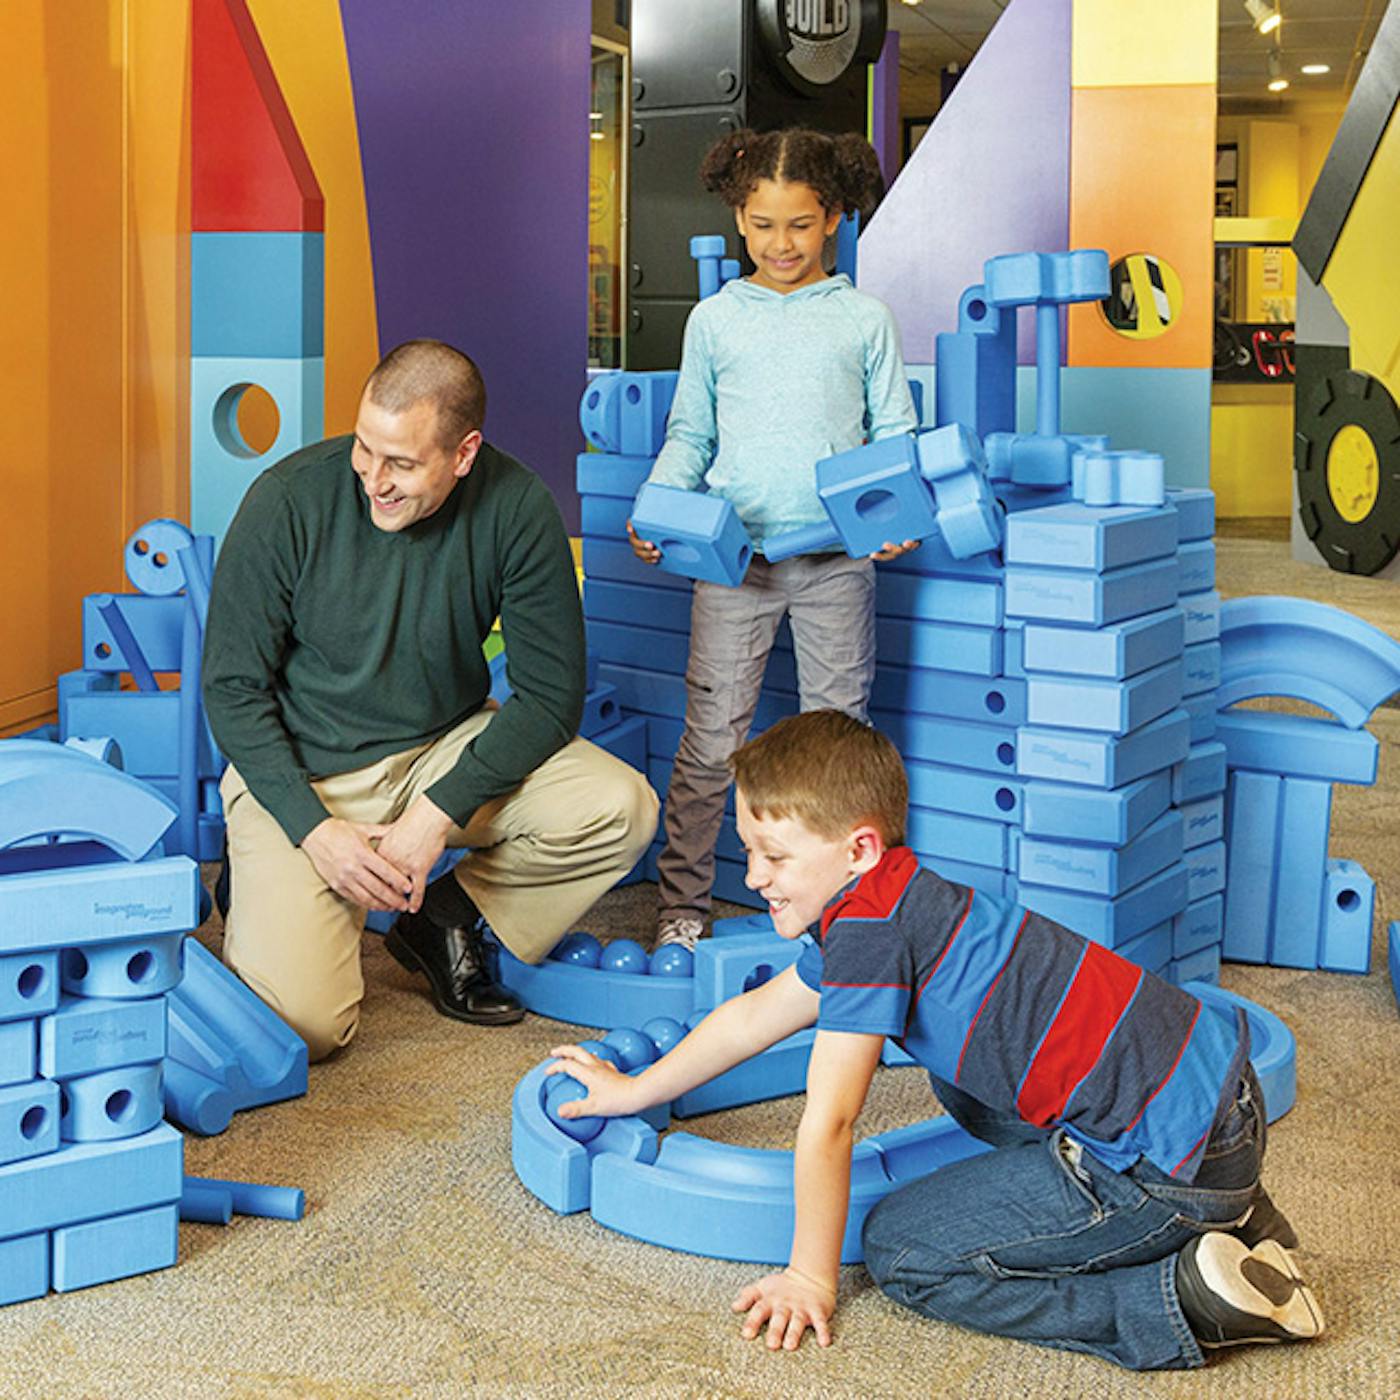 Exhibit at The Strong Museum of Play in Rochester, New York (photo Courtesy of The Strong Museum of Play))